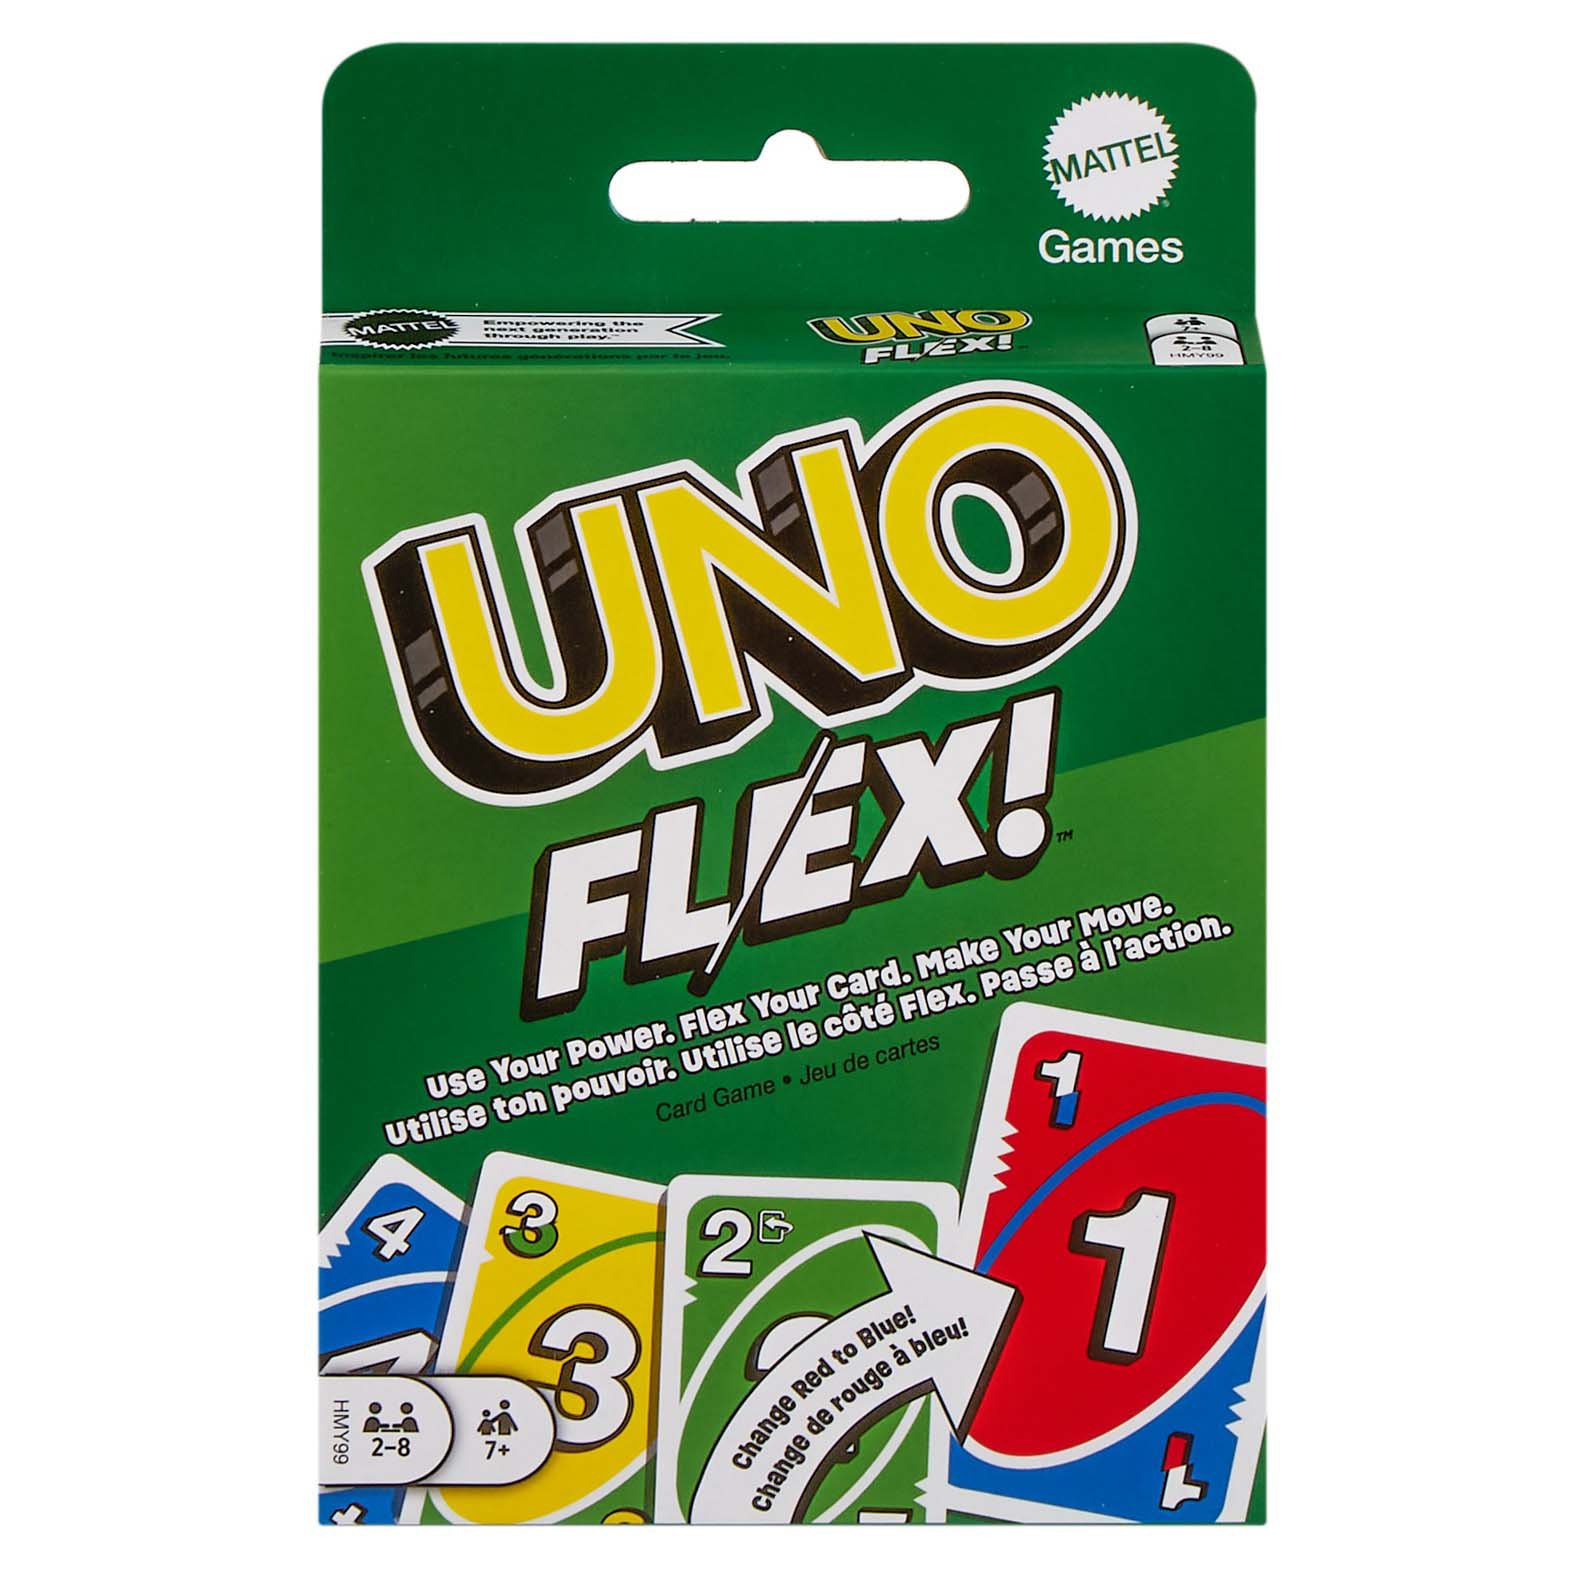 UNO!™ on the App Store